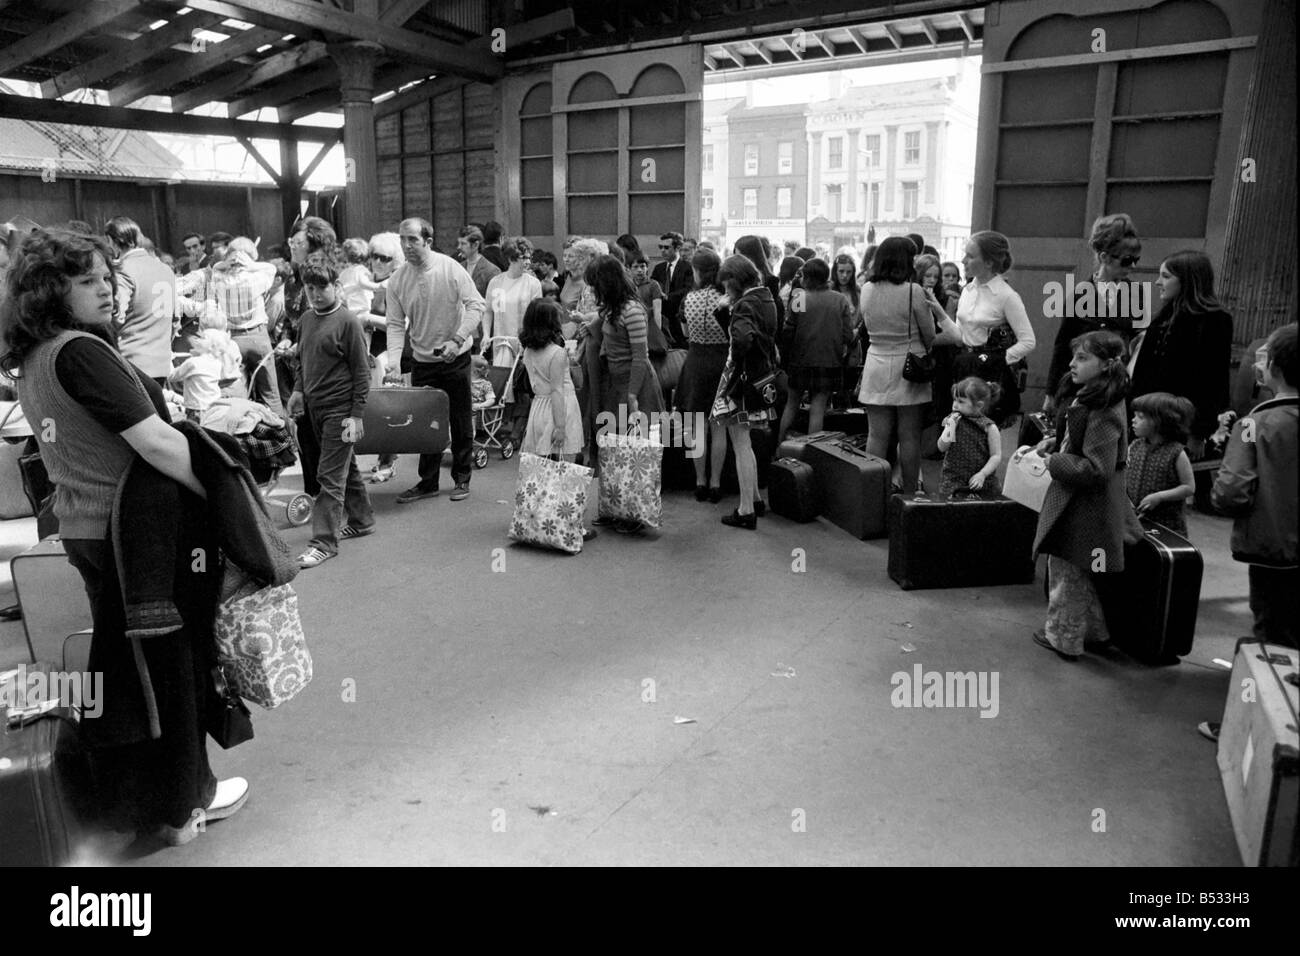 George Phillips, staff. Northern Ireland July 1972. Children waiting for the train in Belfast as families flee from the bombs and bullets. July 1972. July 1972 72-7262 Stock Photo